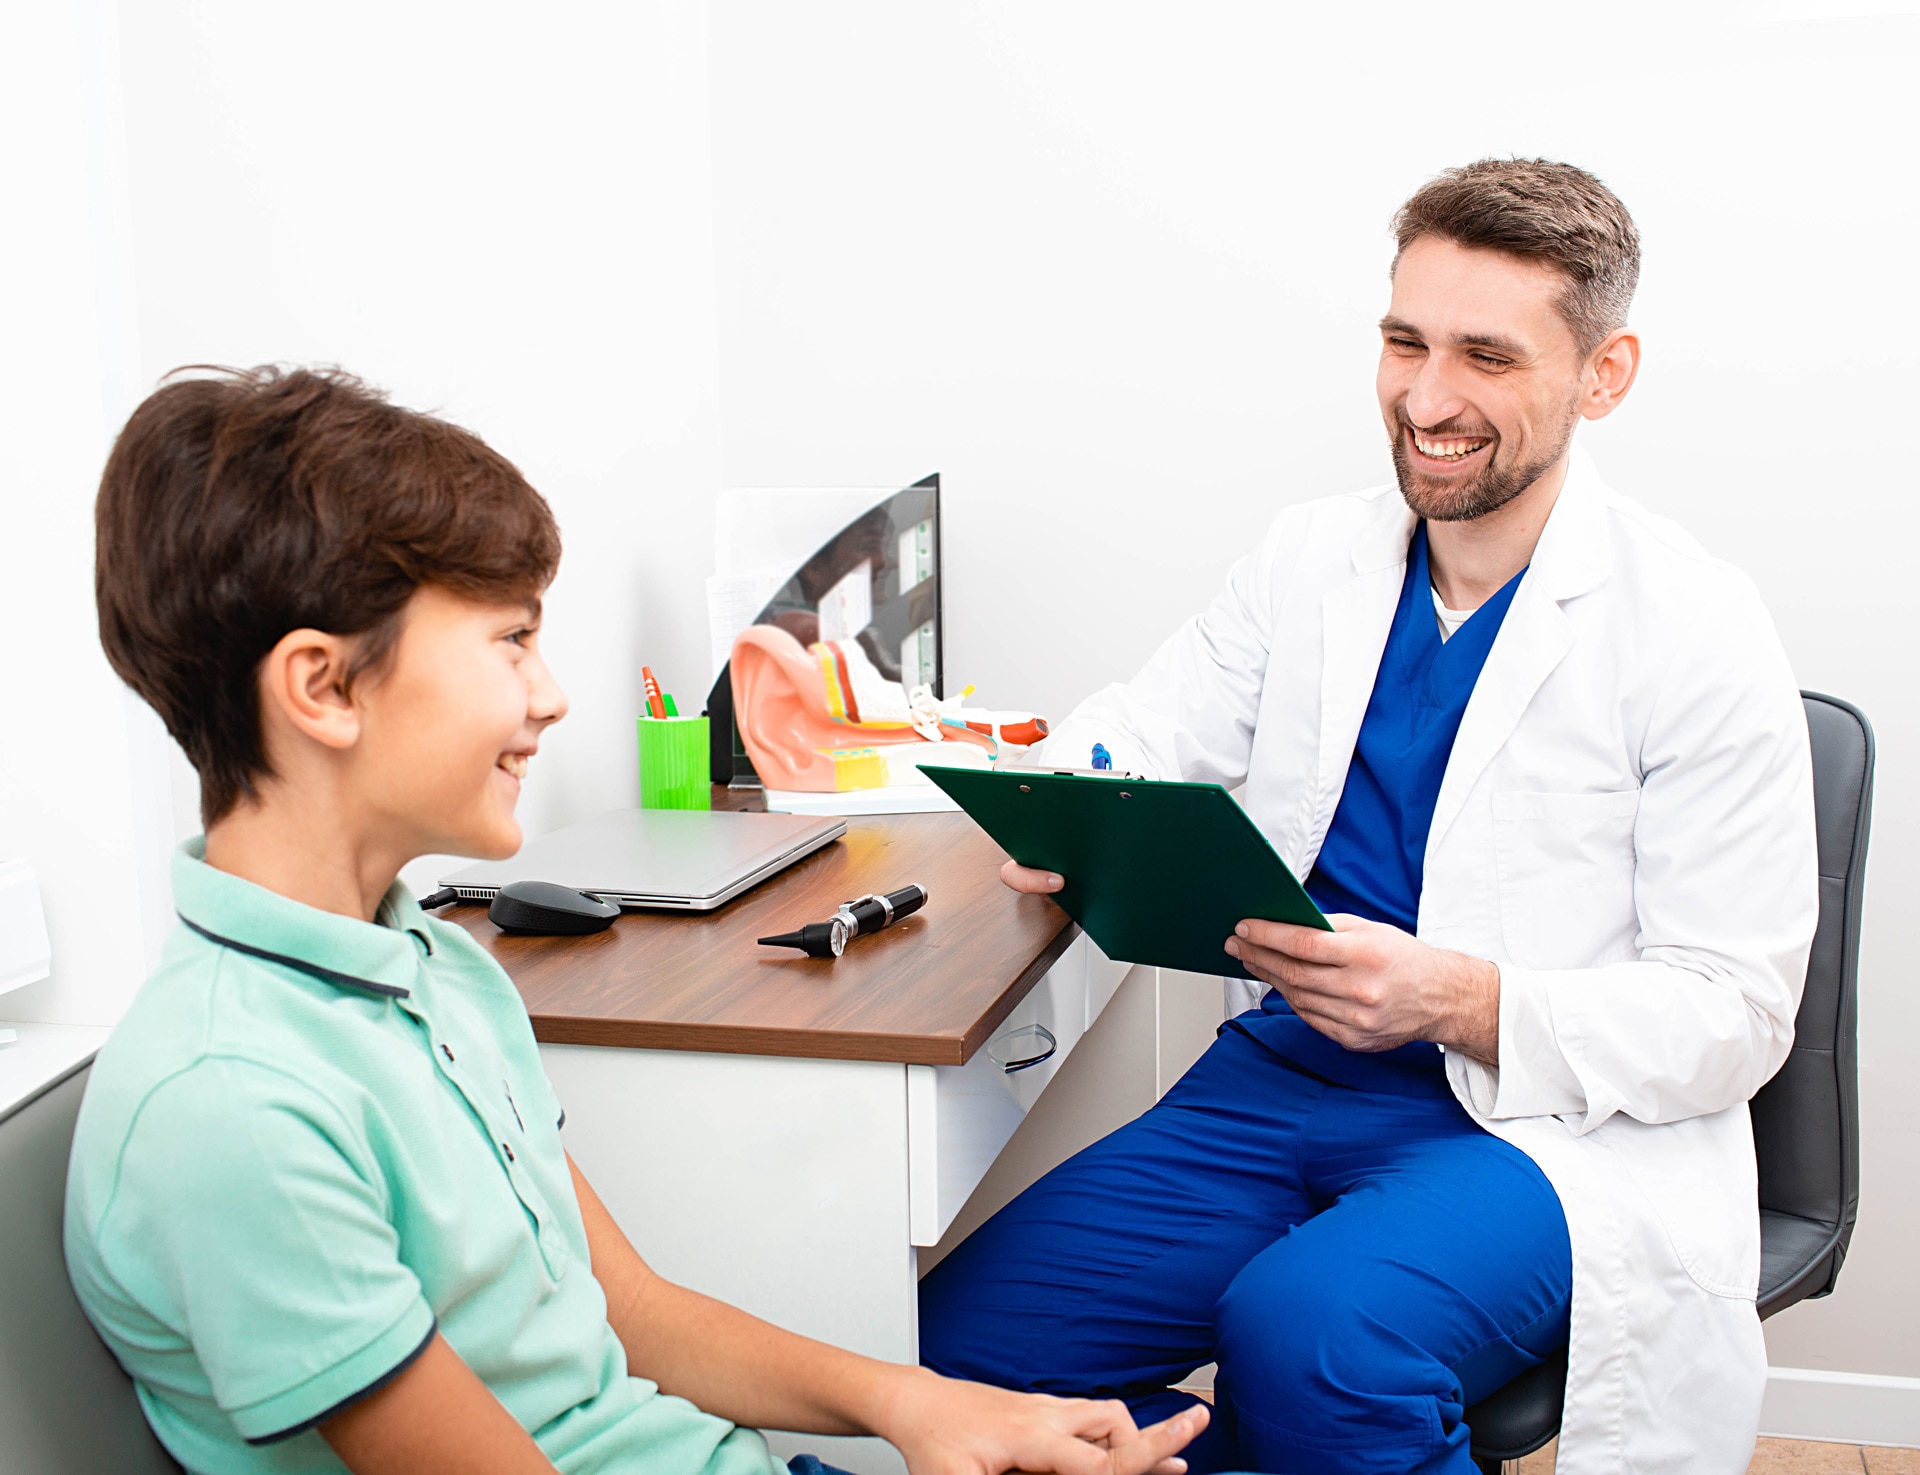 boy visits a doctor audiologist. Hearing test. Audiologist's office; Shutterstock ID 1625923840; purchase_order: -; job: -; client: -; other: -